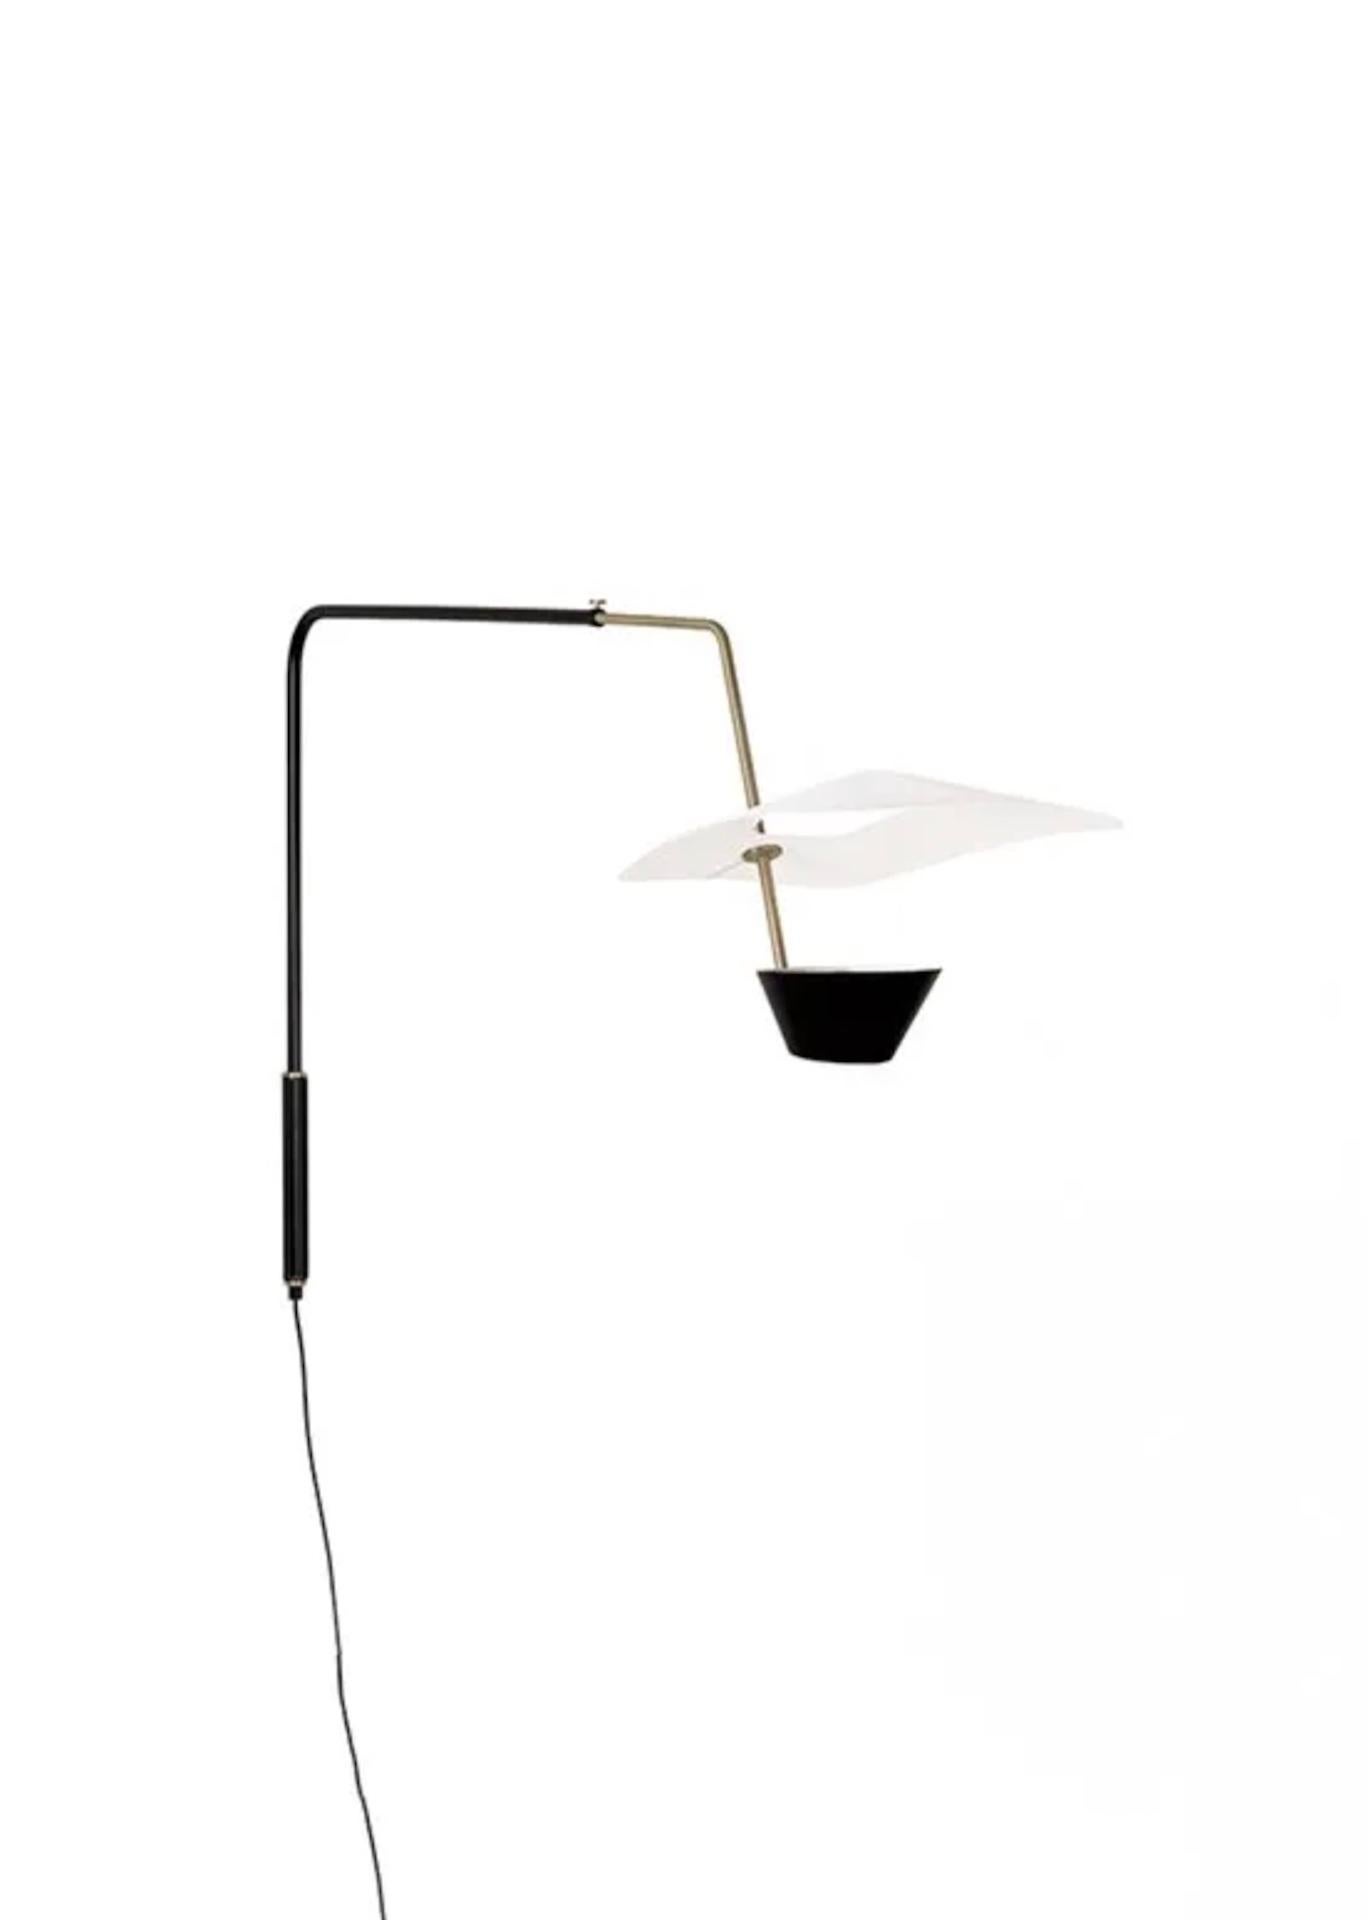 The G25 wall lamp designed by Pierre Guariche will not go unnoticed in your home. It can be used above a dining table, as it was during its designer's lifetime. Or it works equally well in an office or entrance hall, because its proportions make